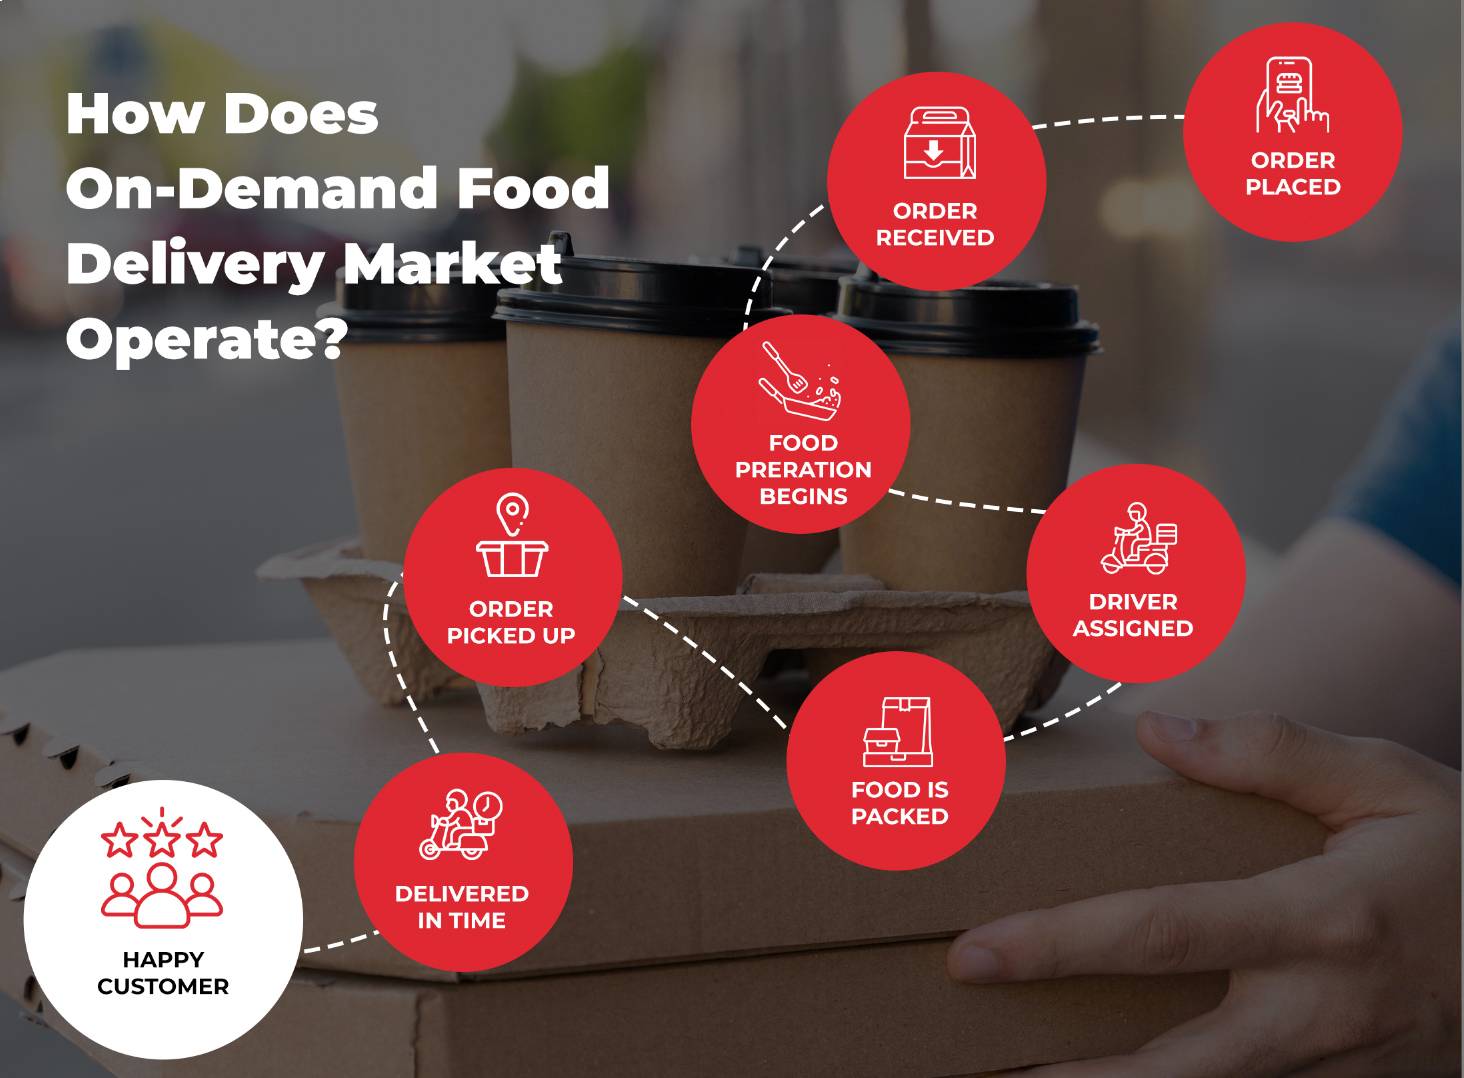 On-demand Food Delivery Market Operation